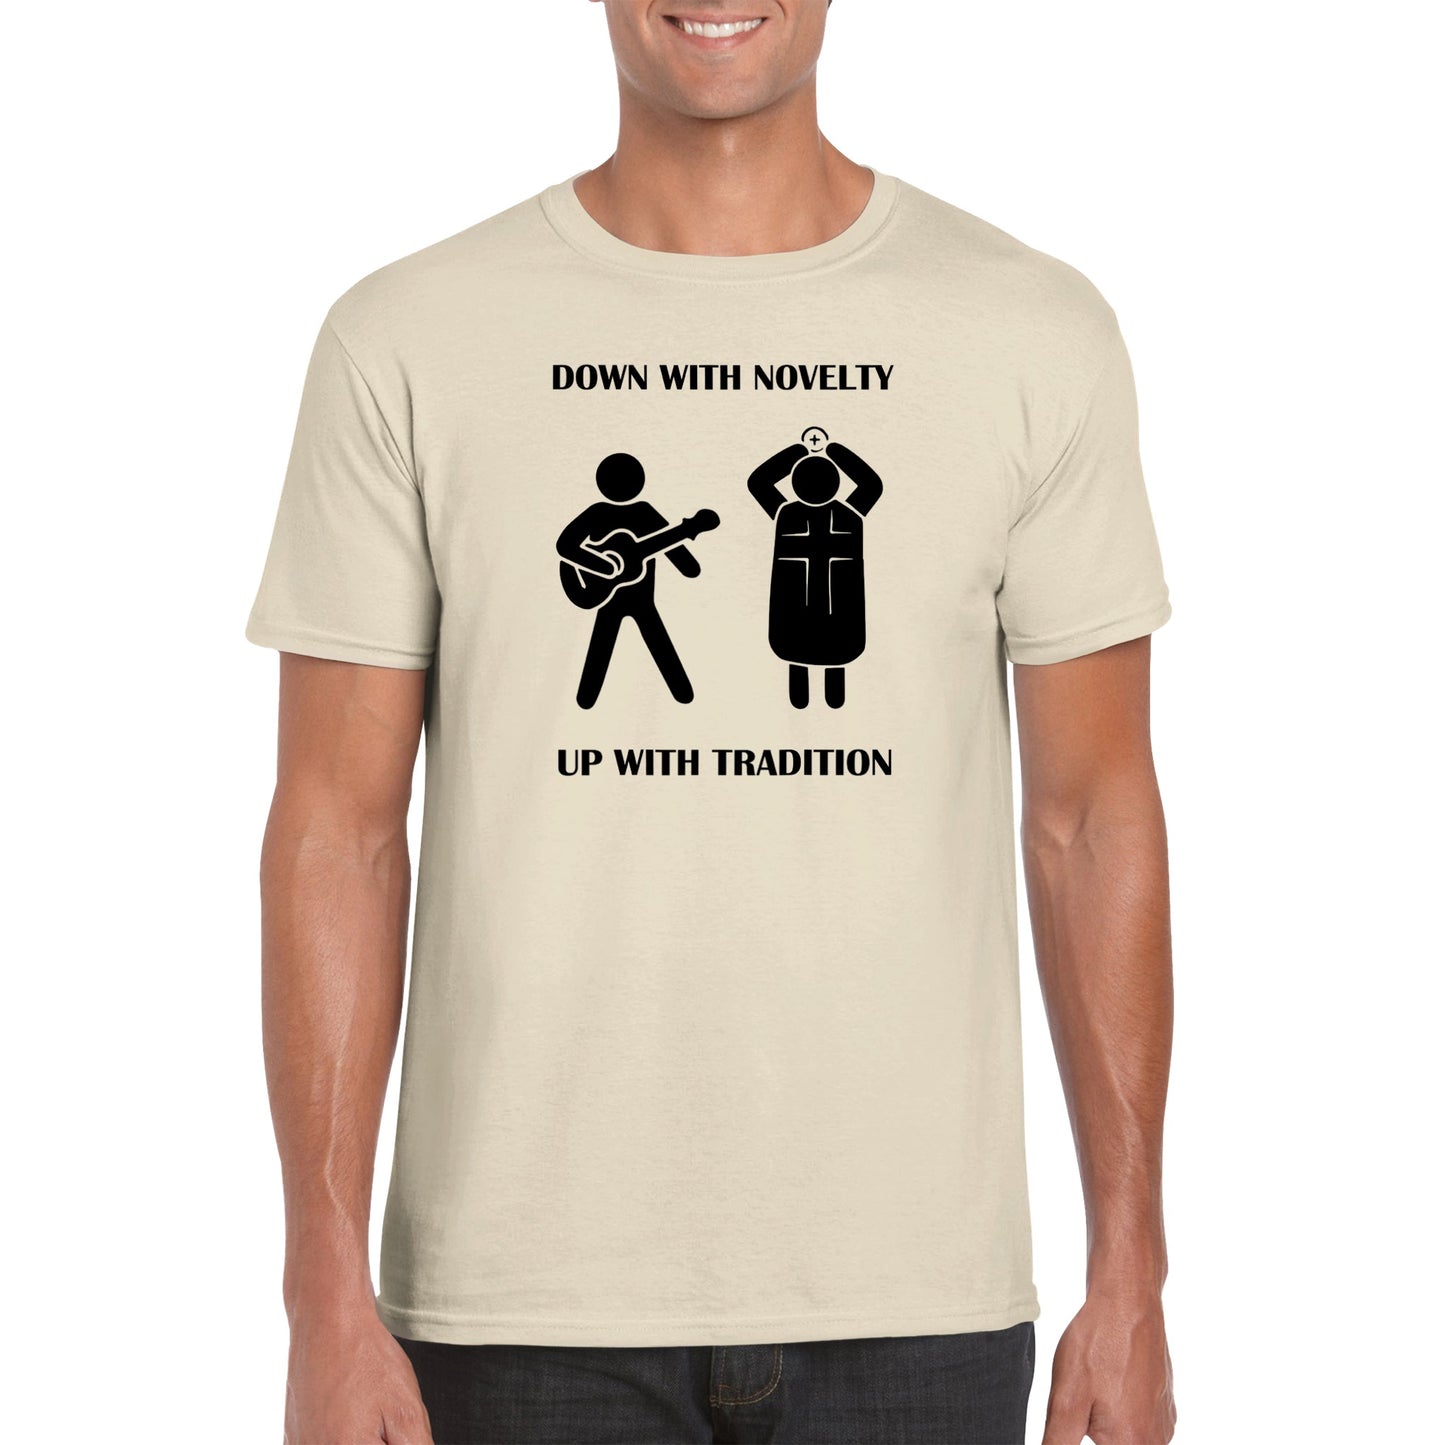 Down with novelty, Up with tradition T-shirt